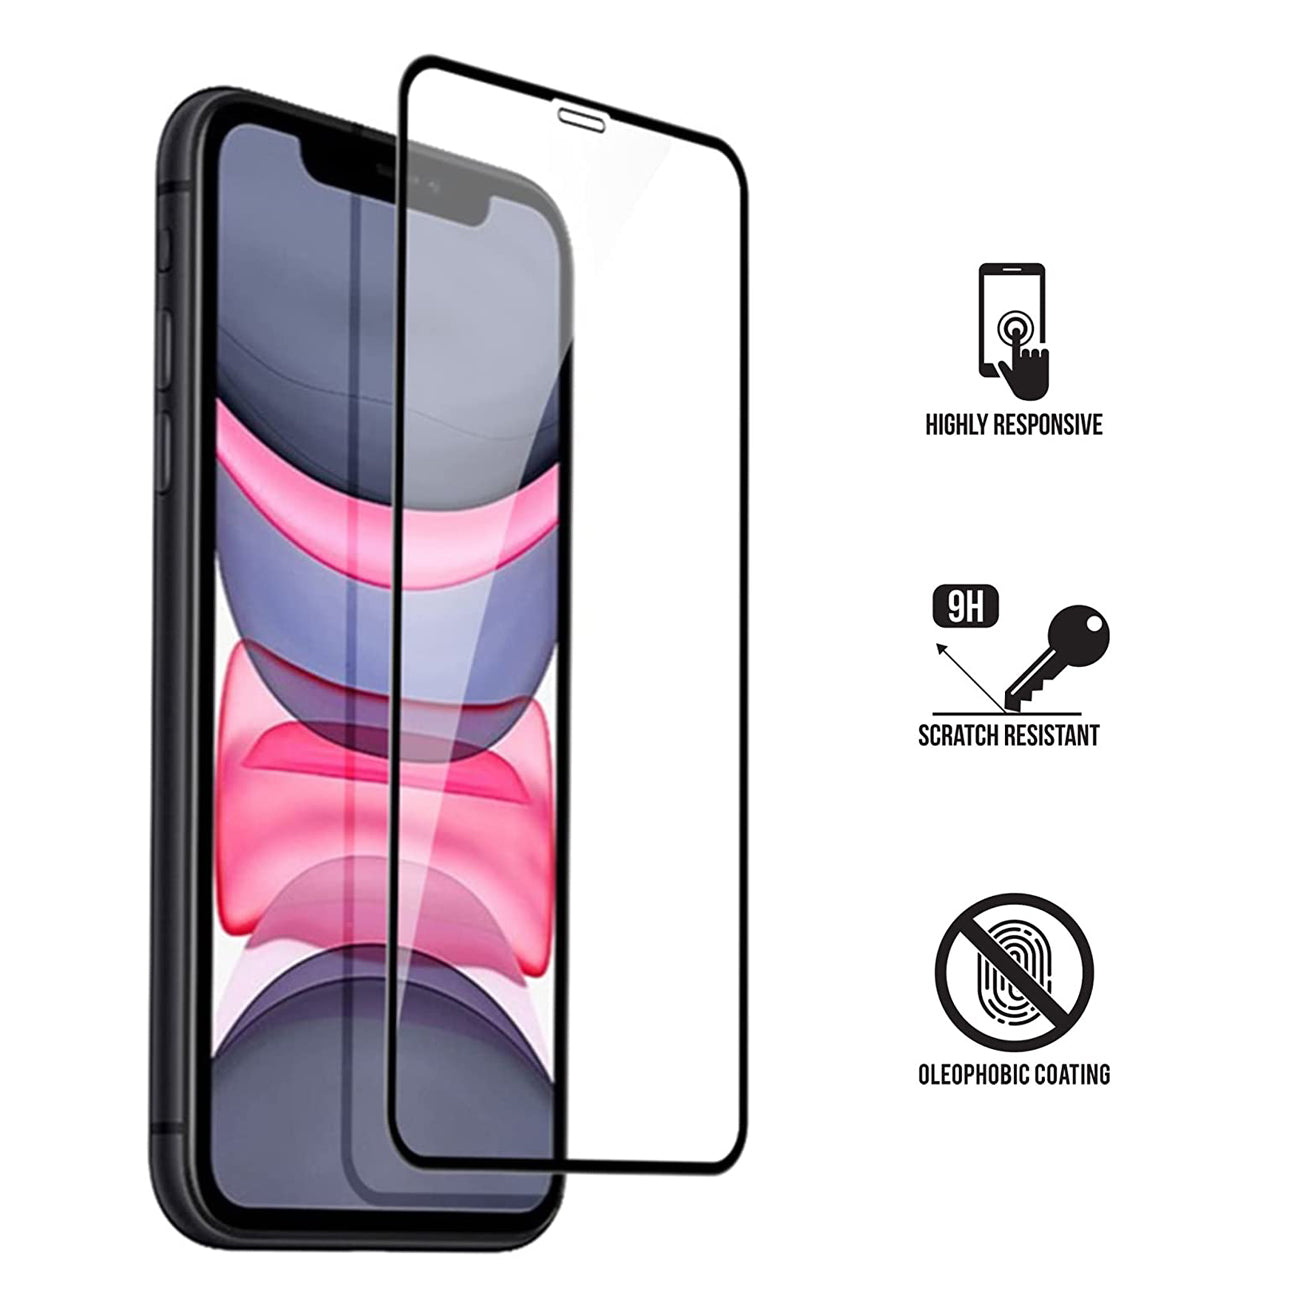 Scratch Resistant Screen Protector for APPLE IPHONE 11